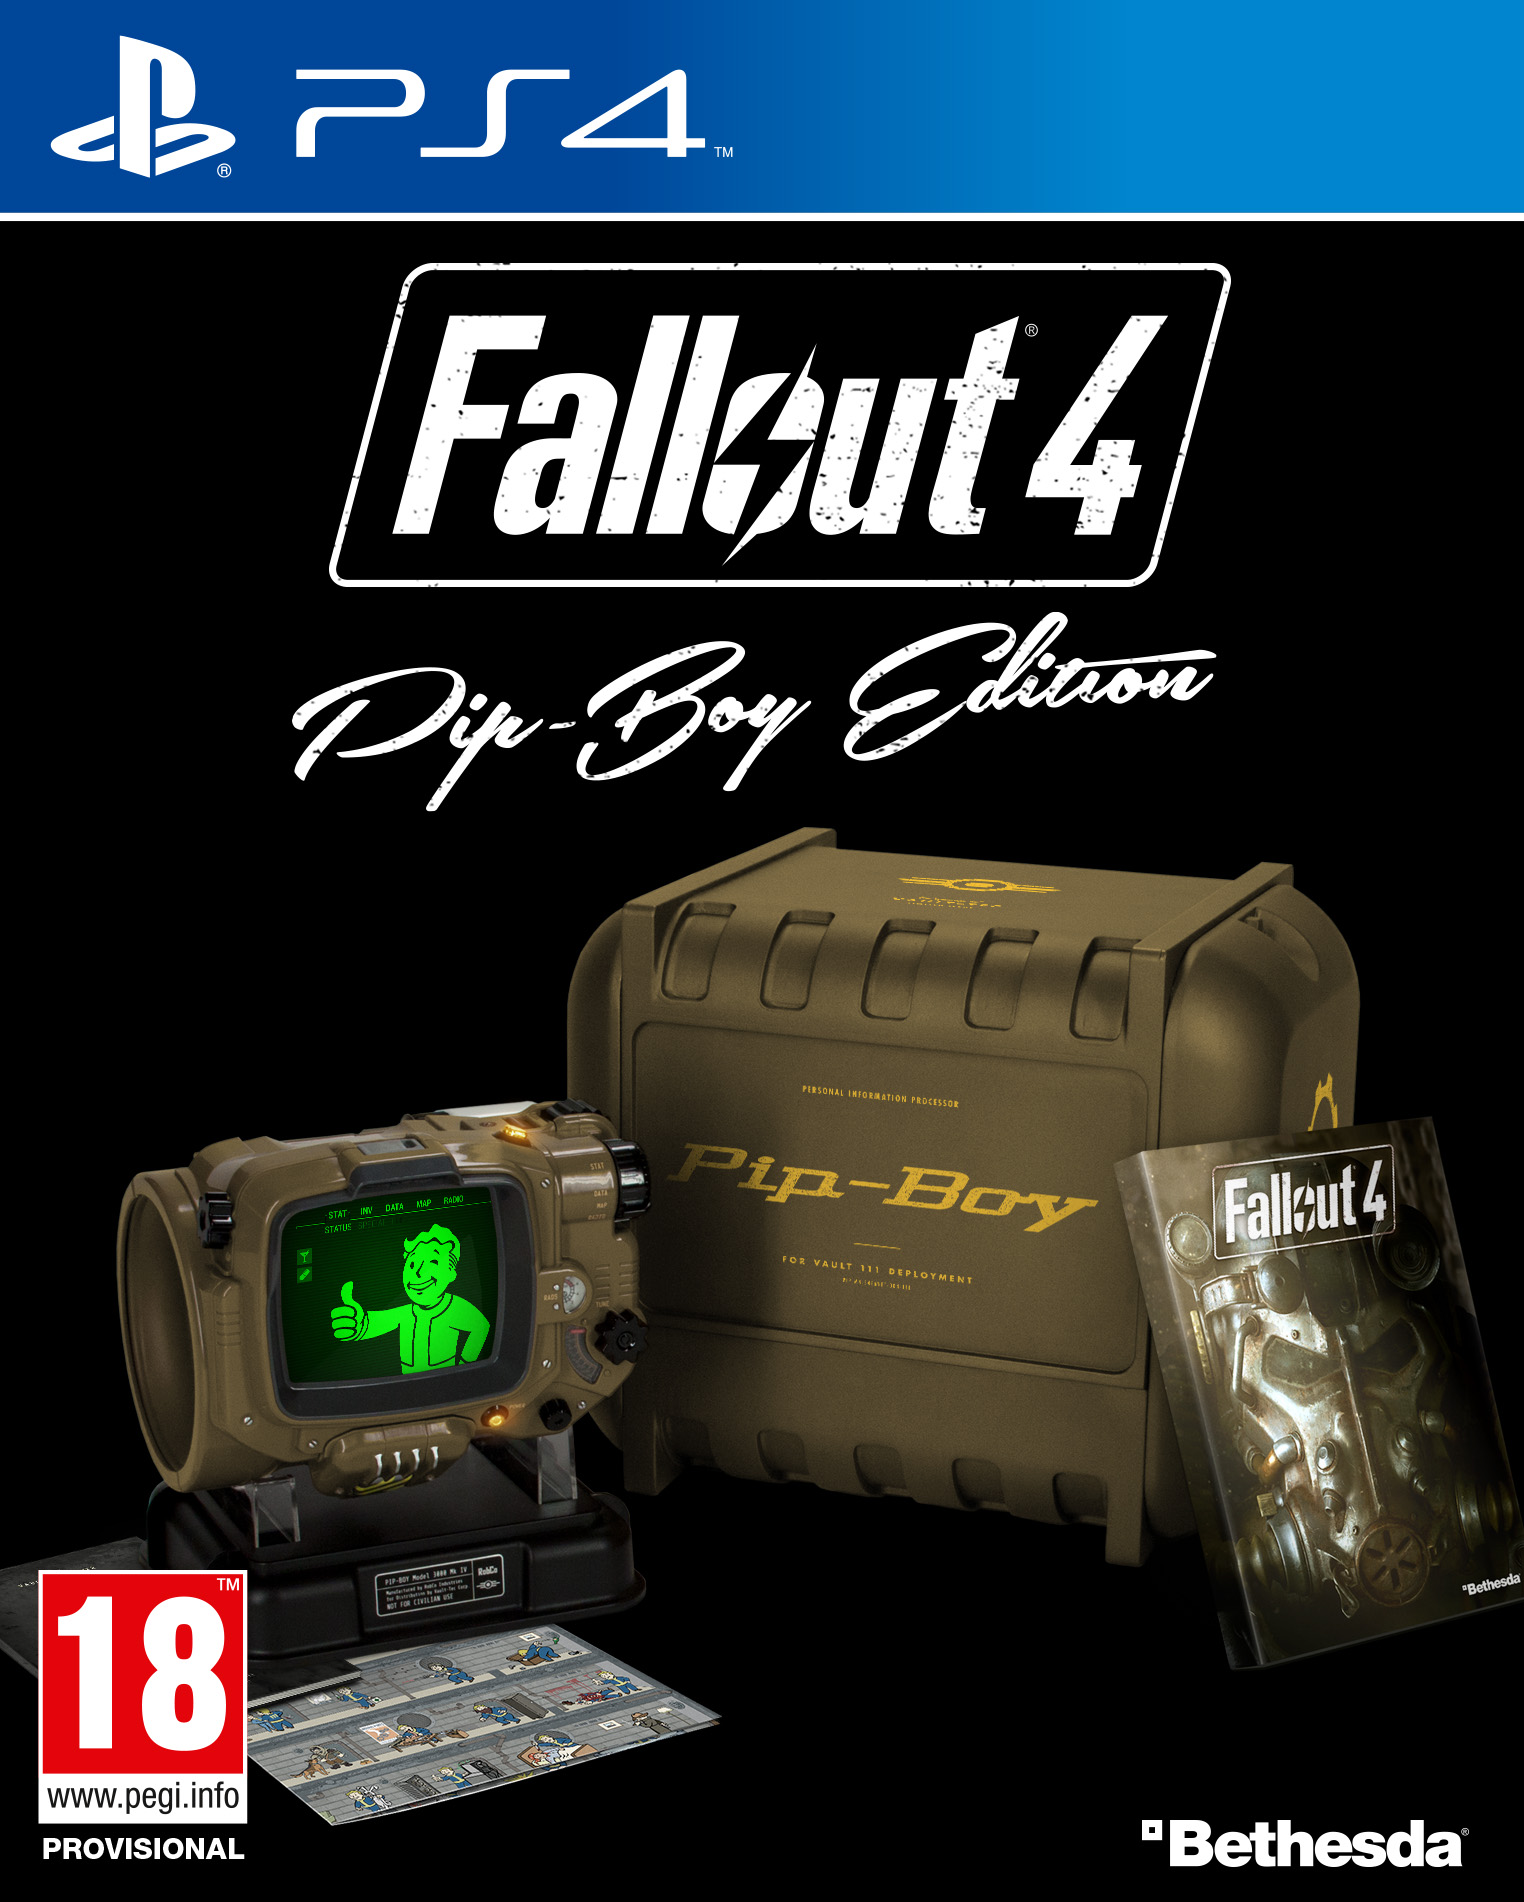 Fallout 4 Pip-Boy Collectors Edition